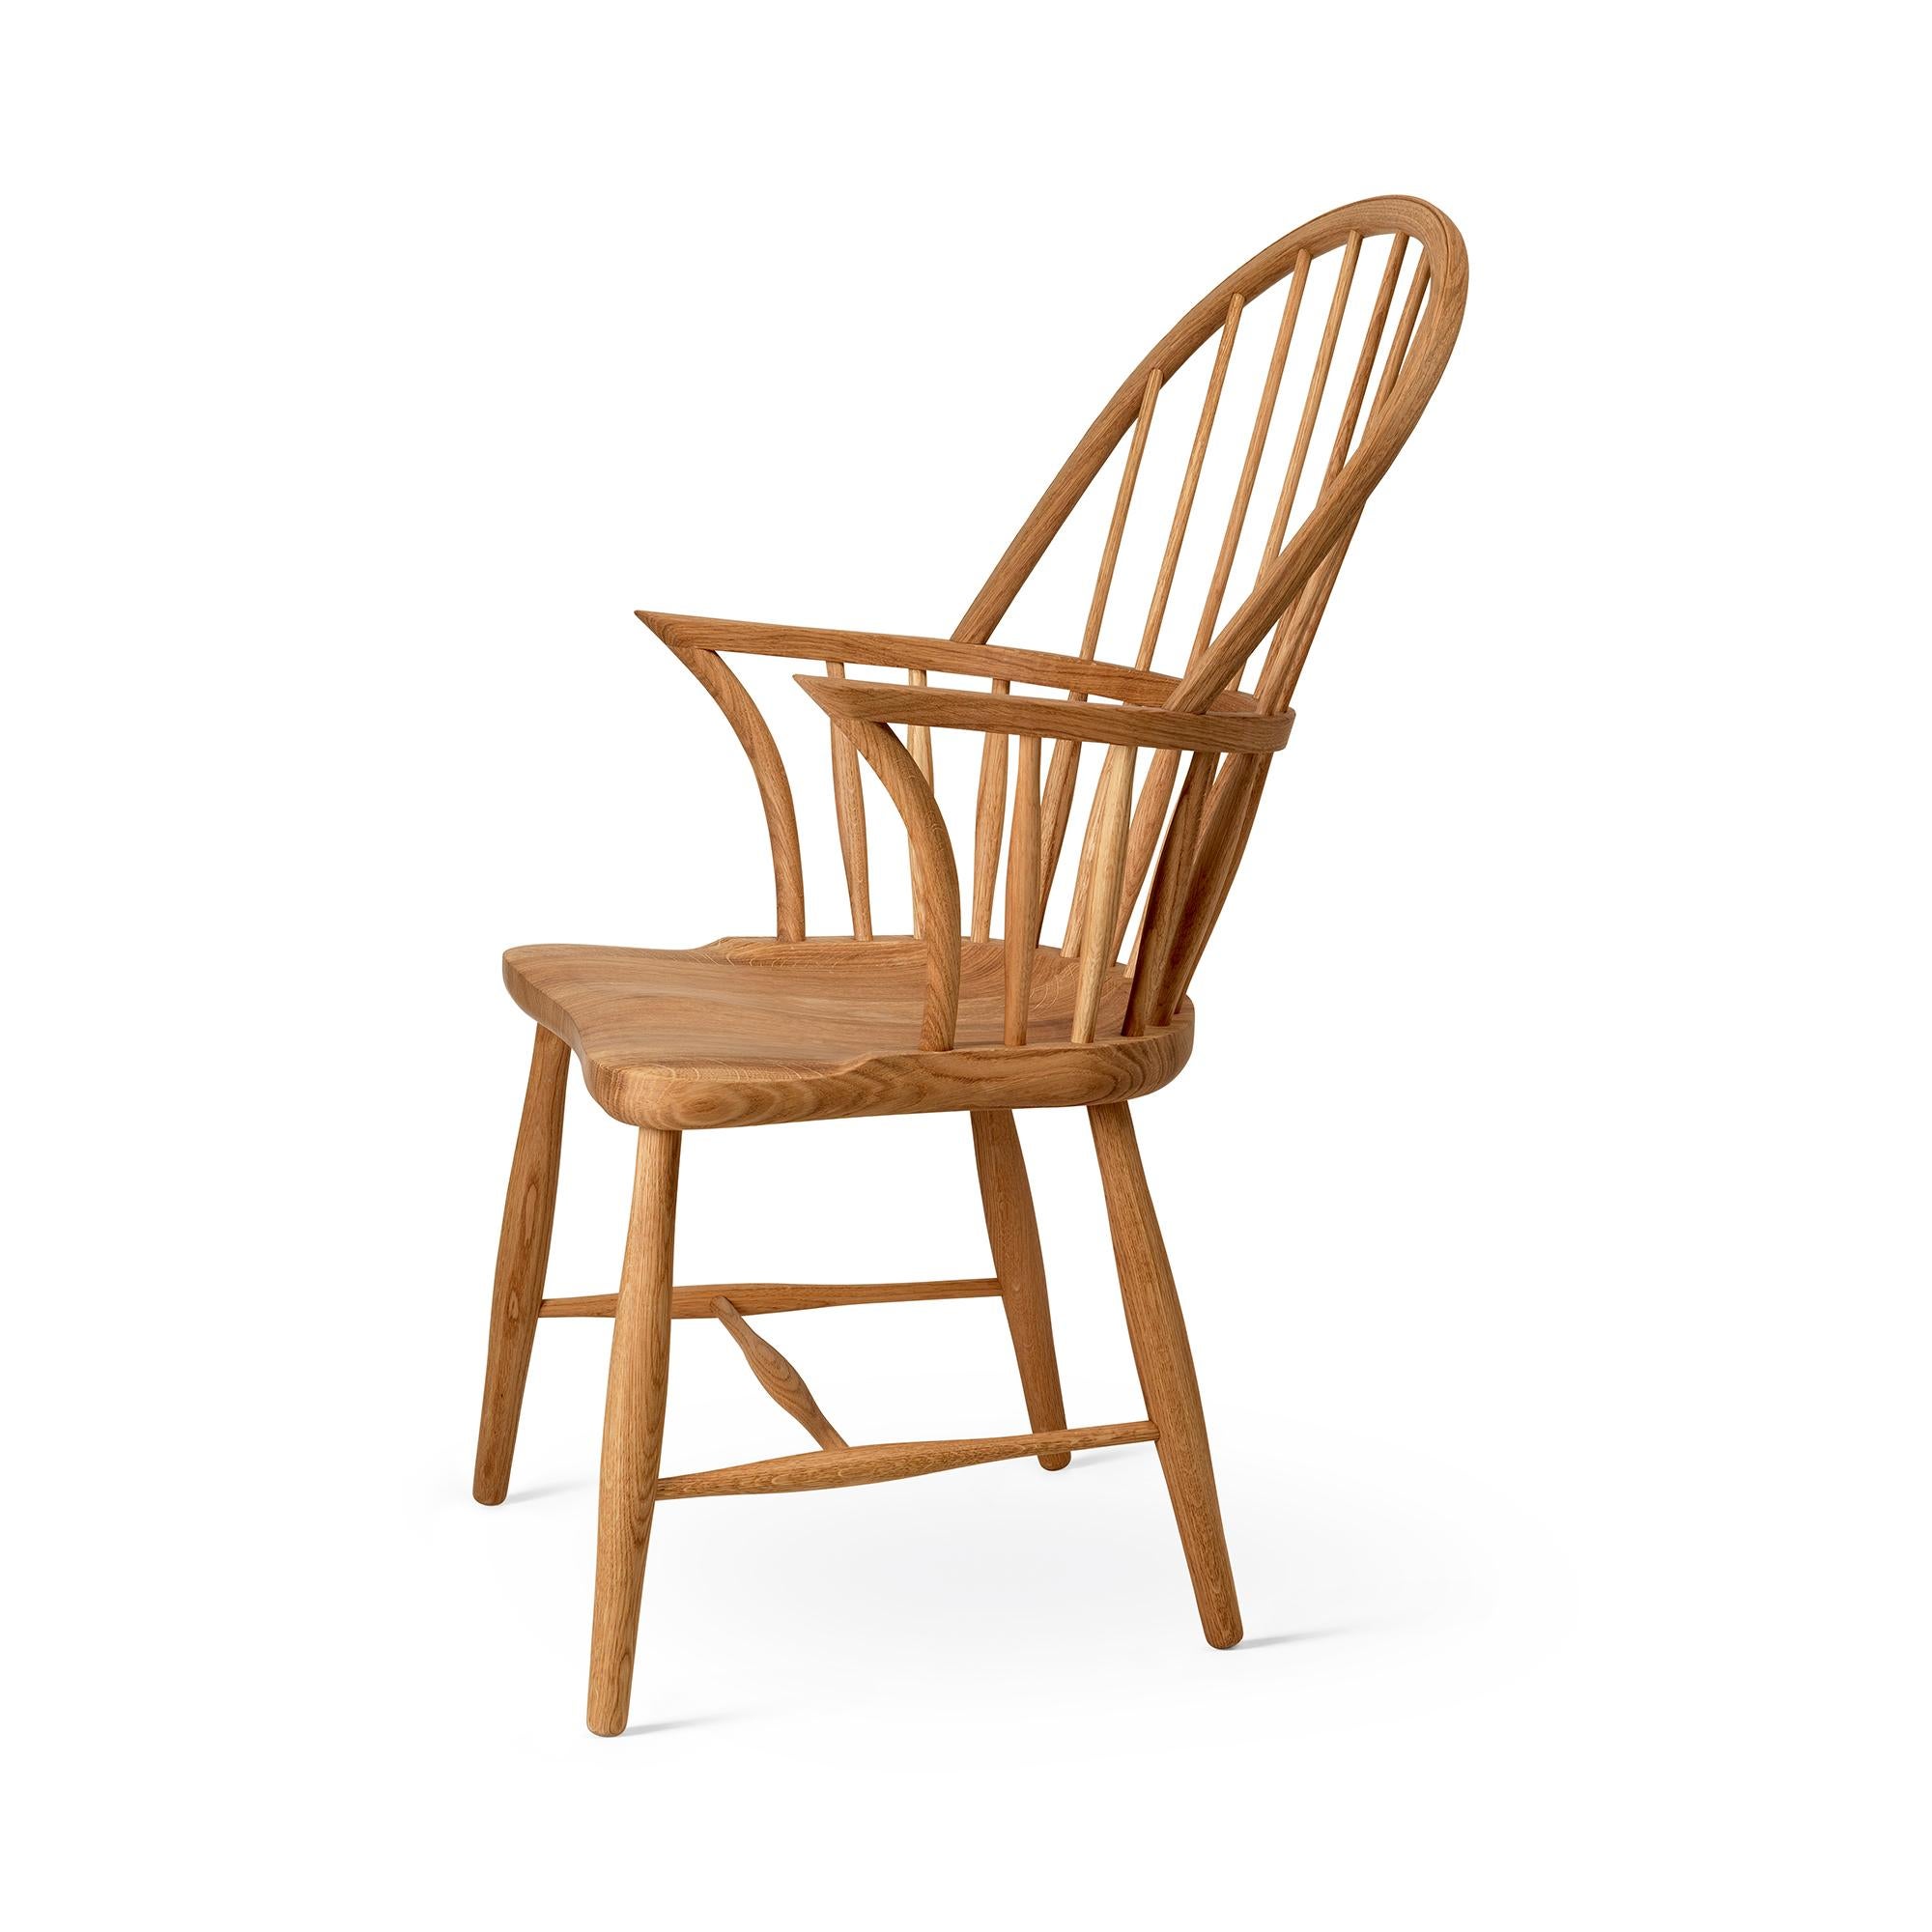 Frits Henningsen 'FH38 Windsor' chair in Oiled Oak for Carl Hansen & Son.

The story of Danish Modern begins in 1908 when Carl Hansen opened his first workshop. His firm commitment to beauty, comfort, refinement, and craftsmanship is evident in